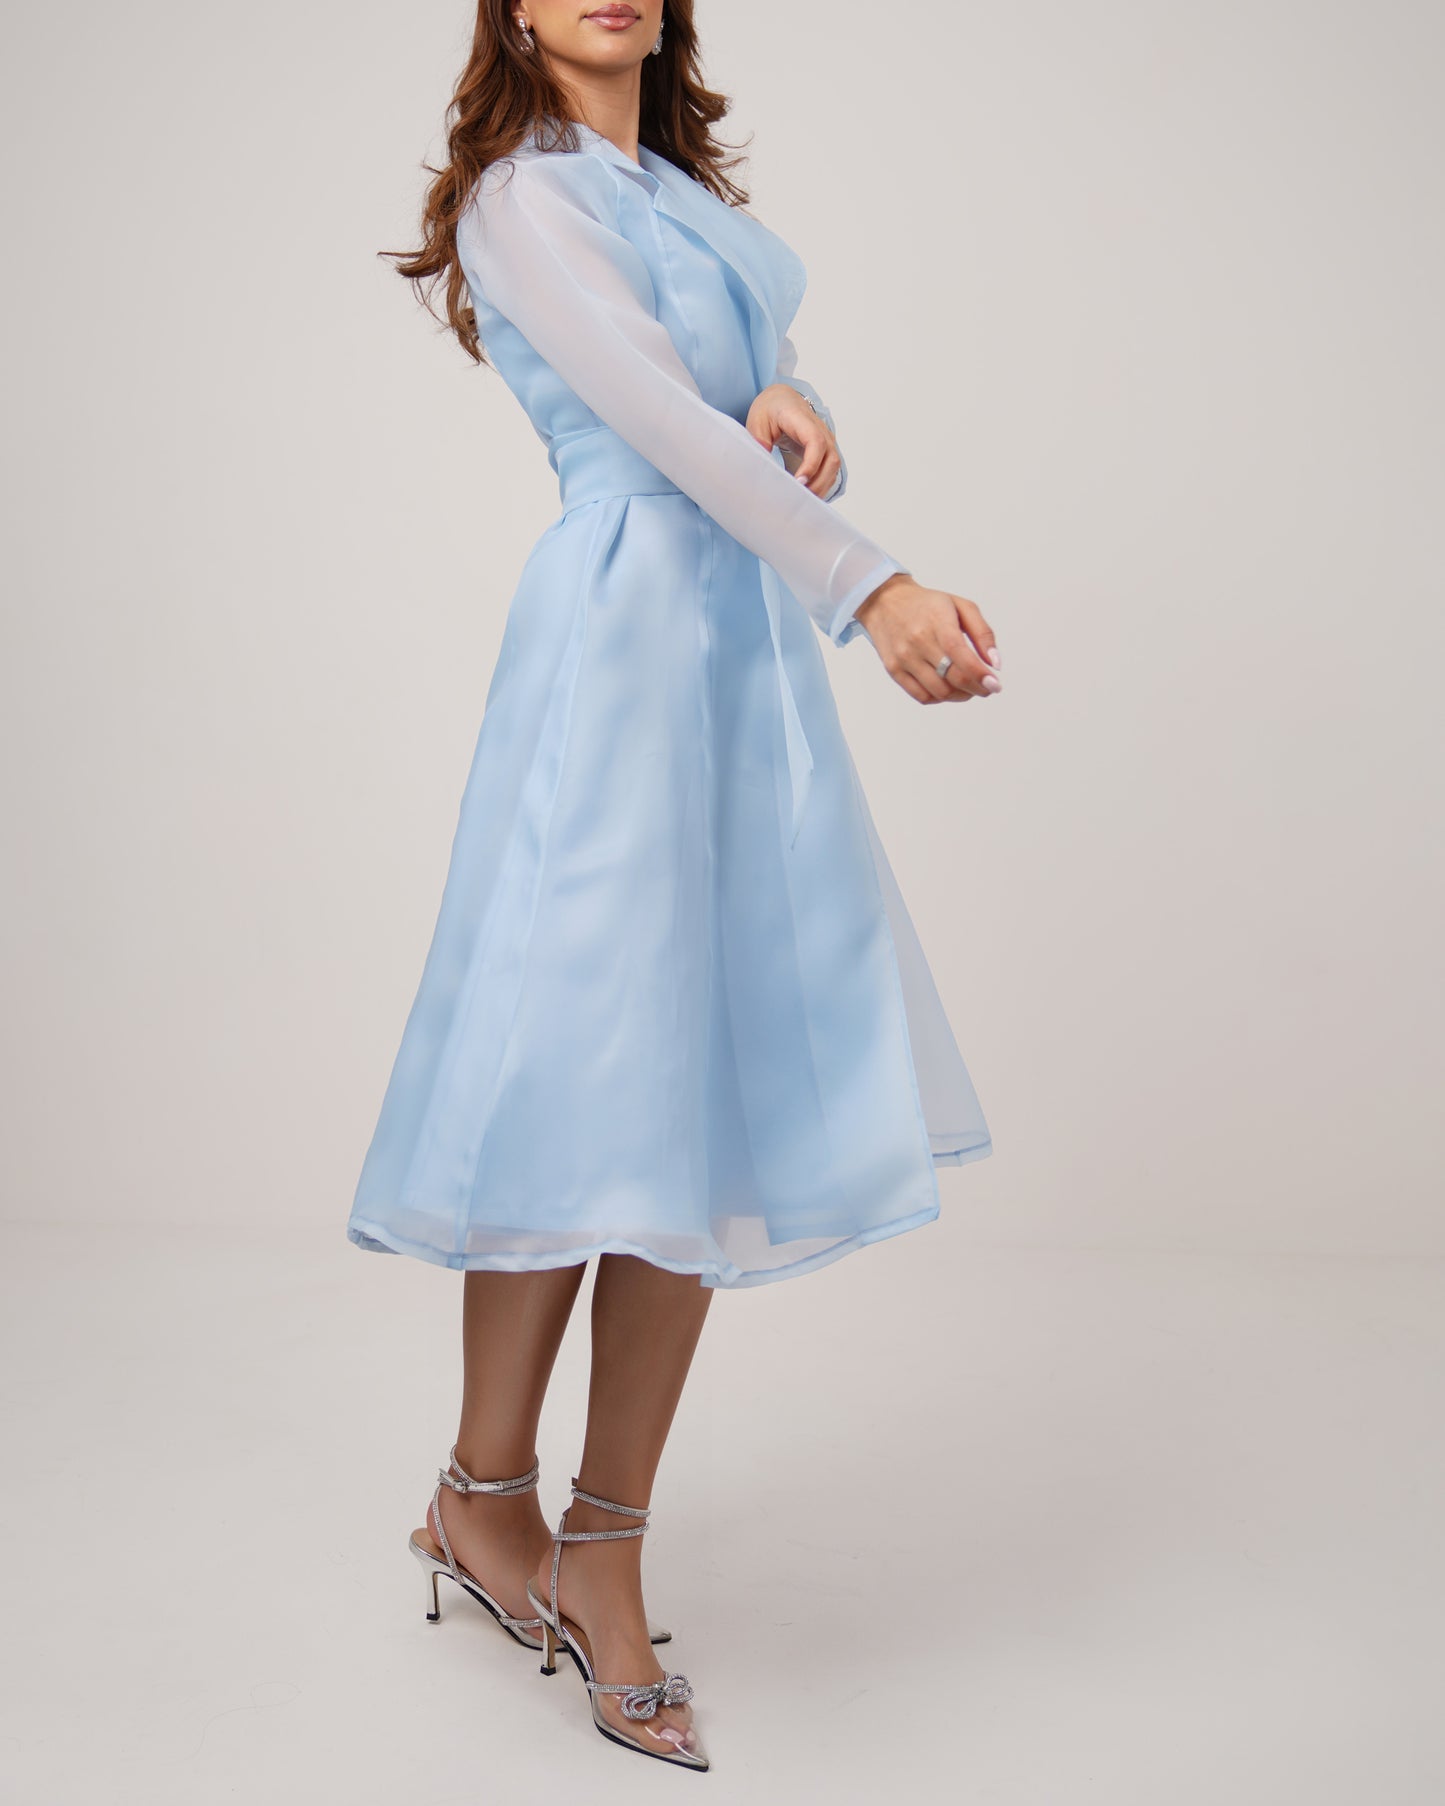 Satin dress toped with organza belted jacket